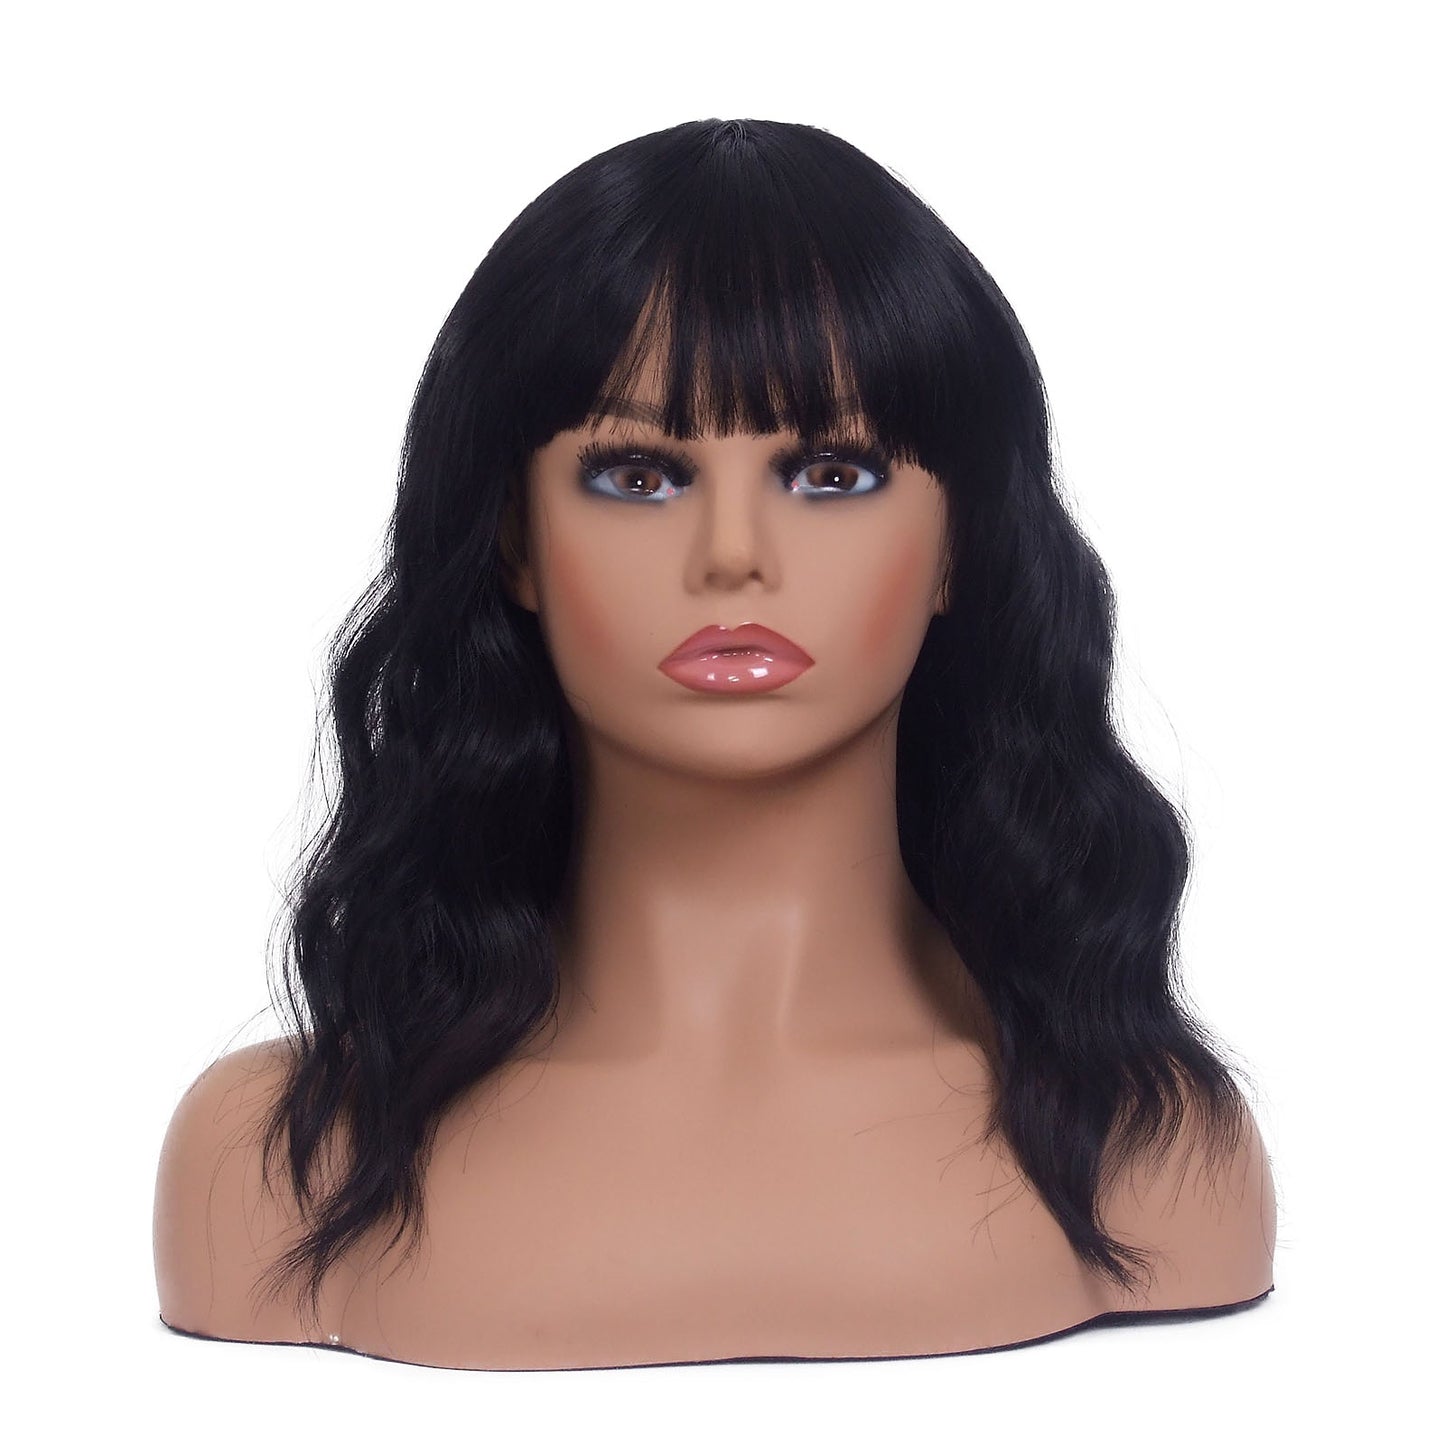 LINGDORA Black Short Curly Wigs Synthetic Hair